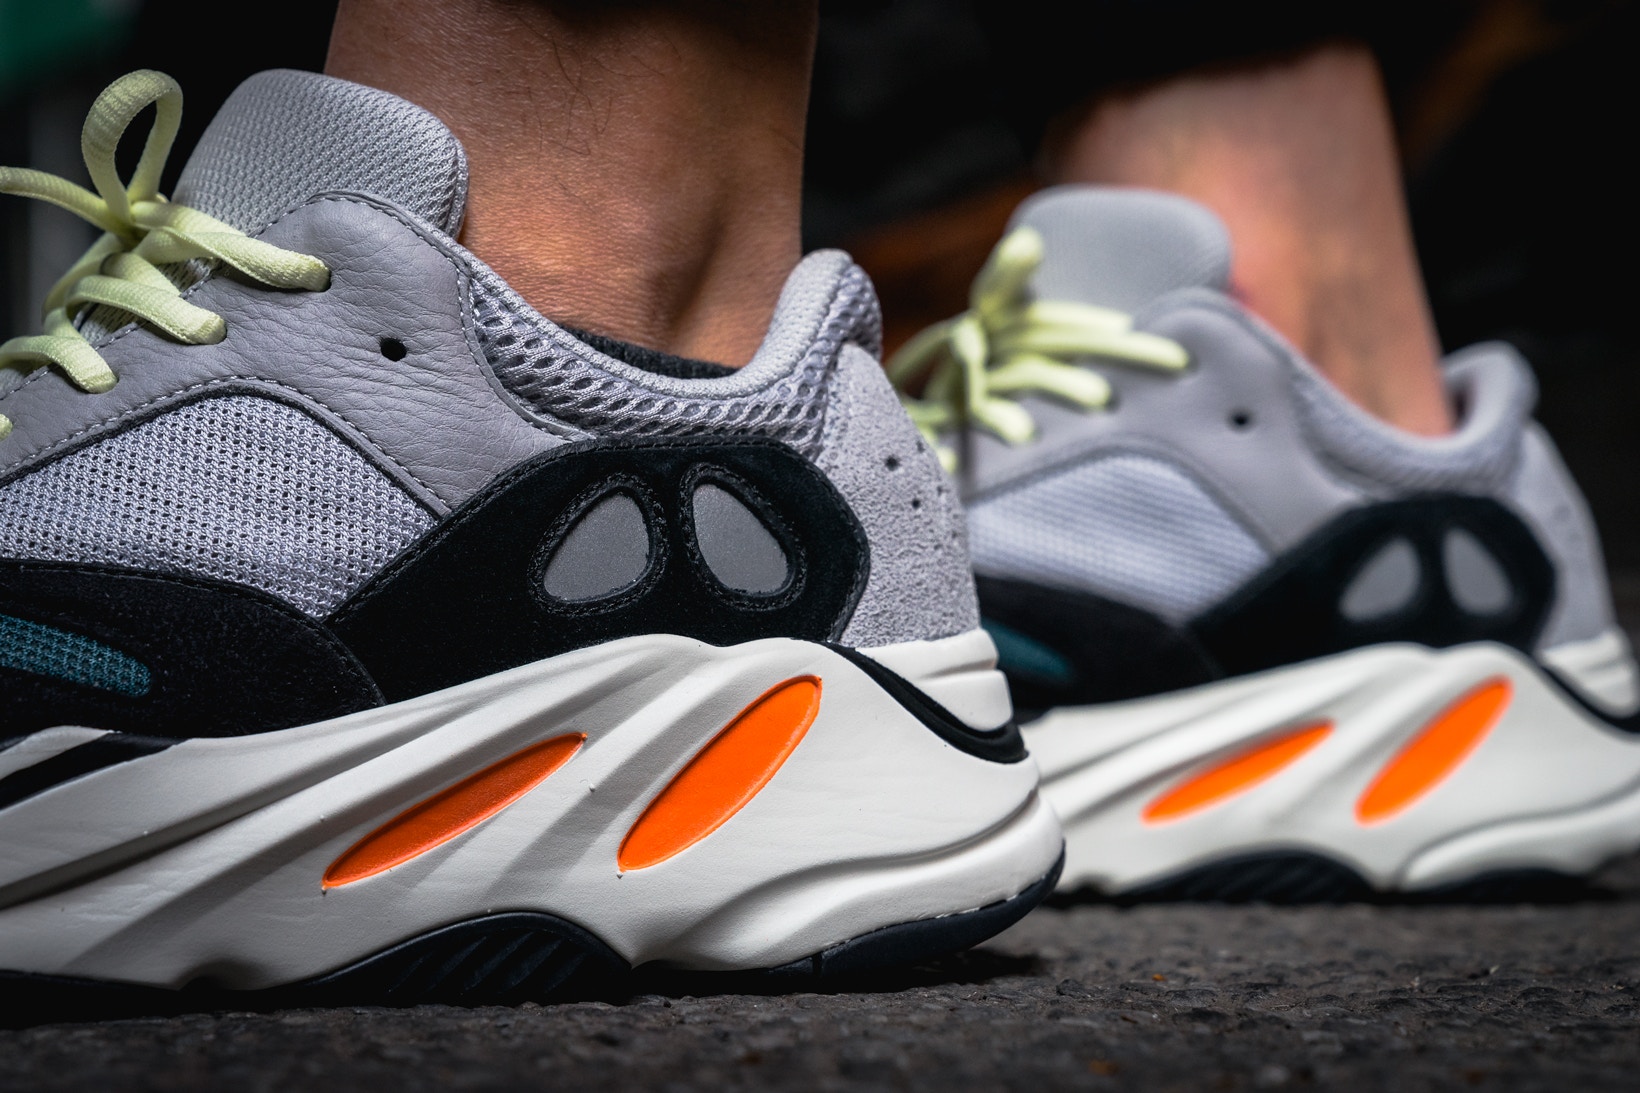 The Closest Look at The adidas YEEZY BOOST 700 Yet